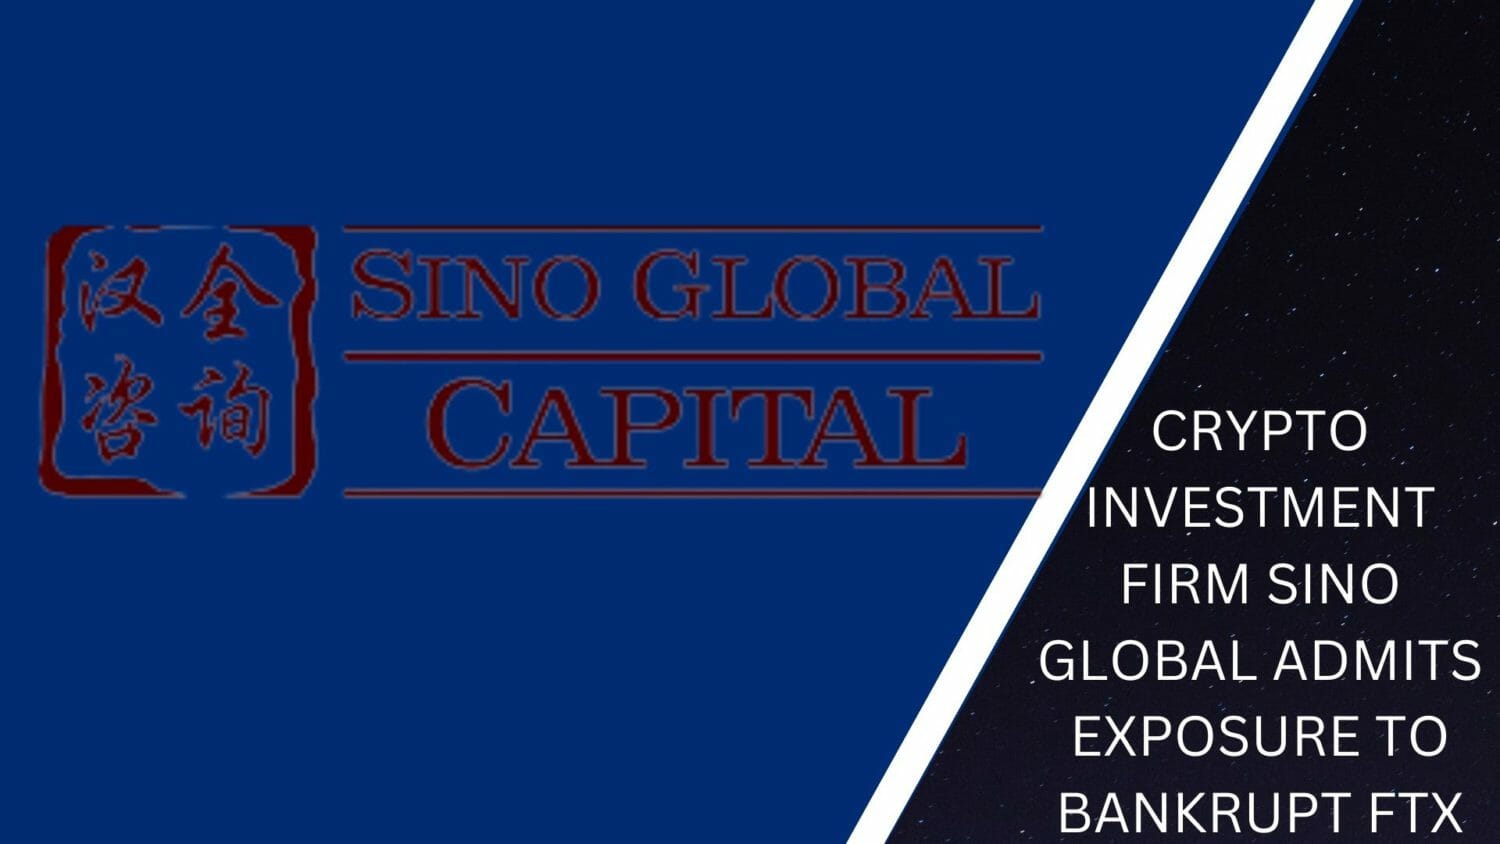 Crypto Investment Firm Sino Global Admits Exposure To Bankrupt Ftx